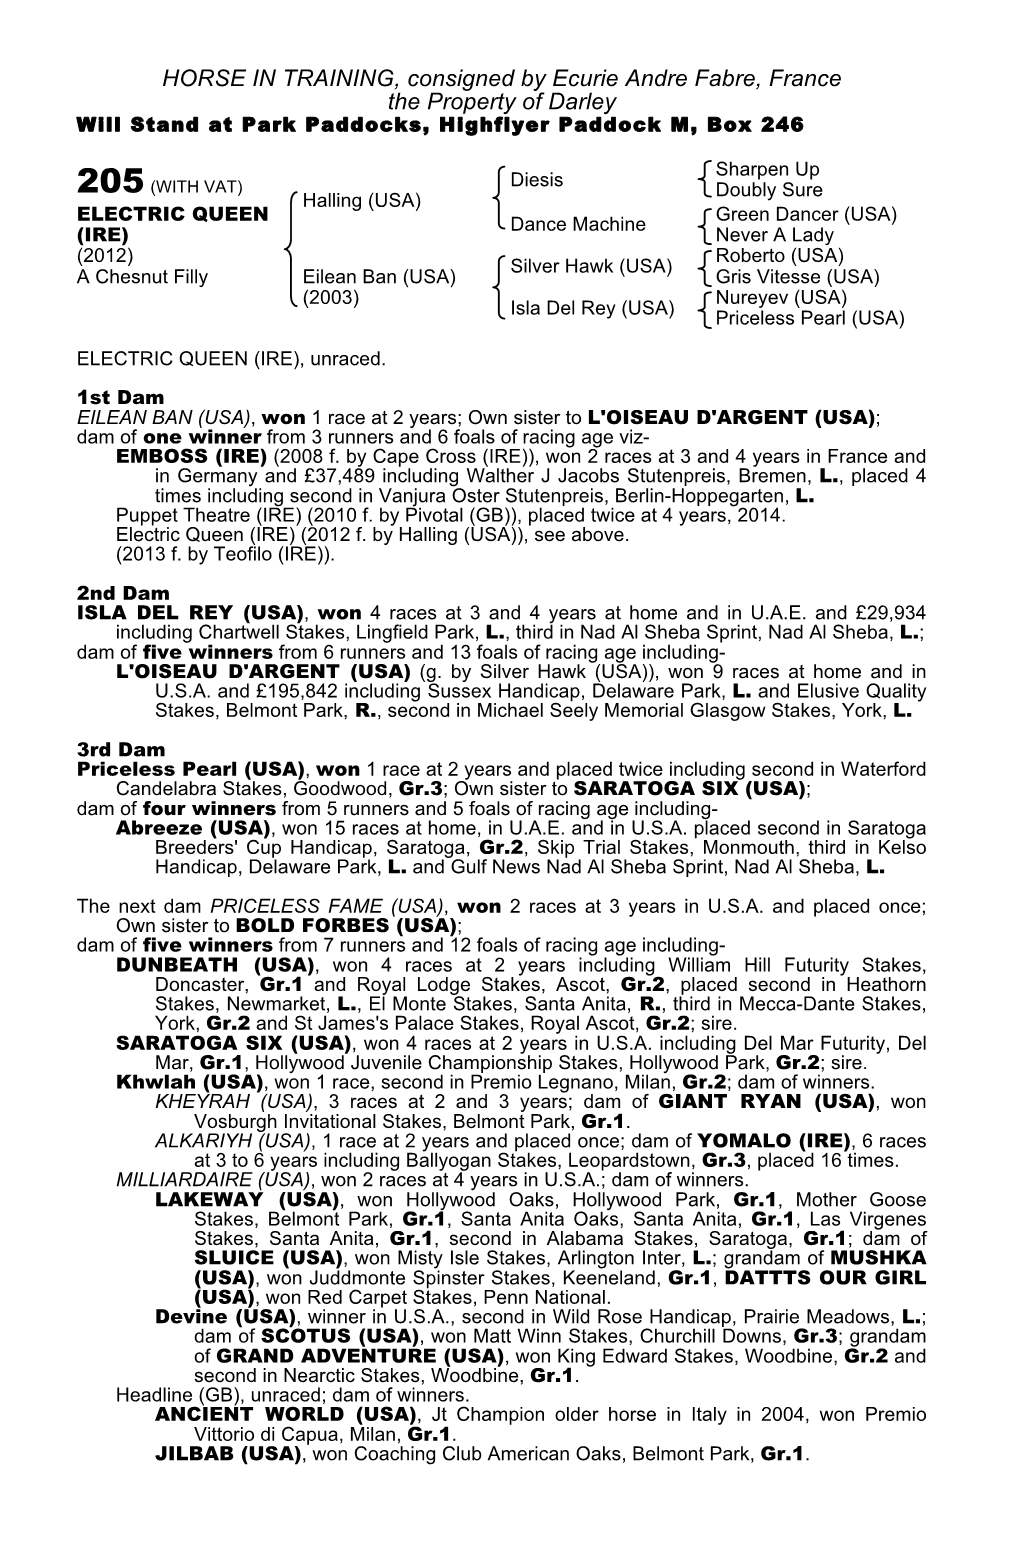 HORSE in TRAINING, Consigned by Ecurie Andre Fabre, France the Property of Darley Will Stand at Park Paddocks, Highflyer Paddock M, Box 246